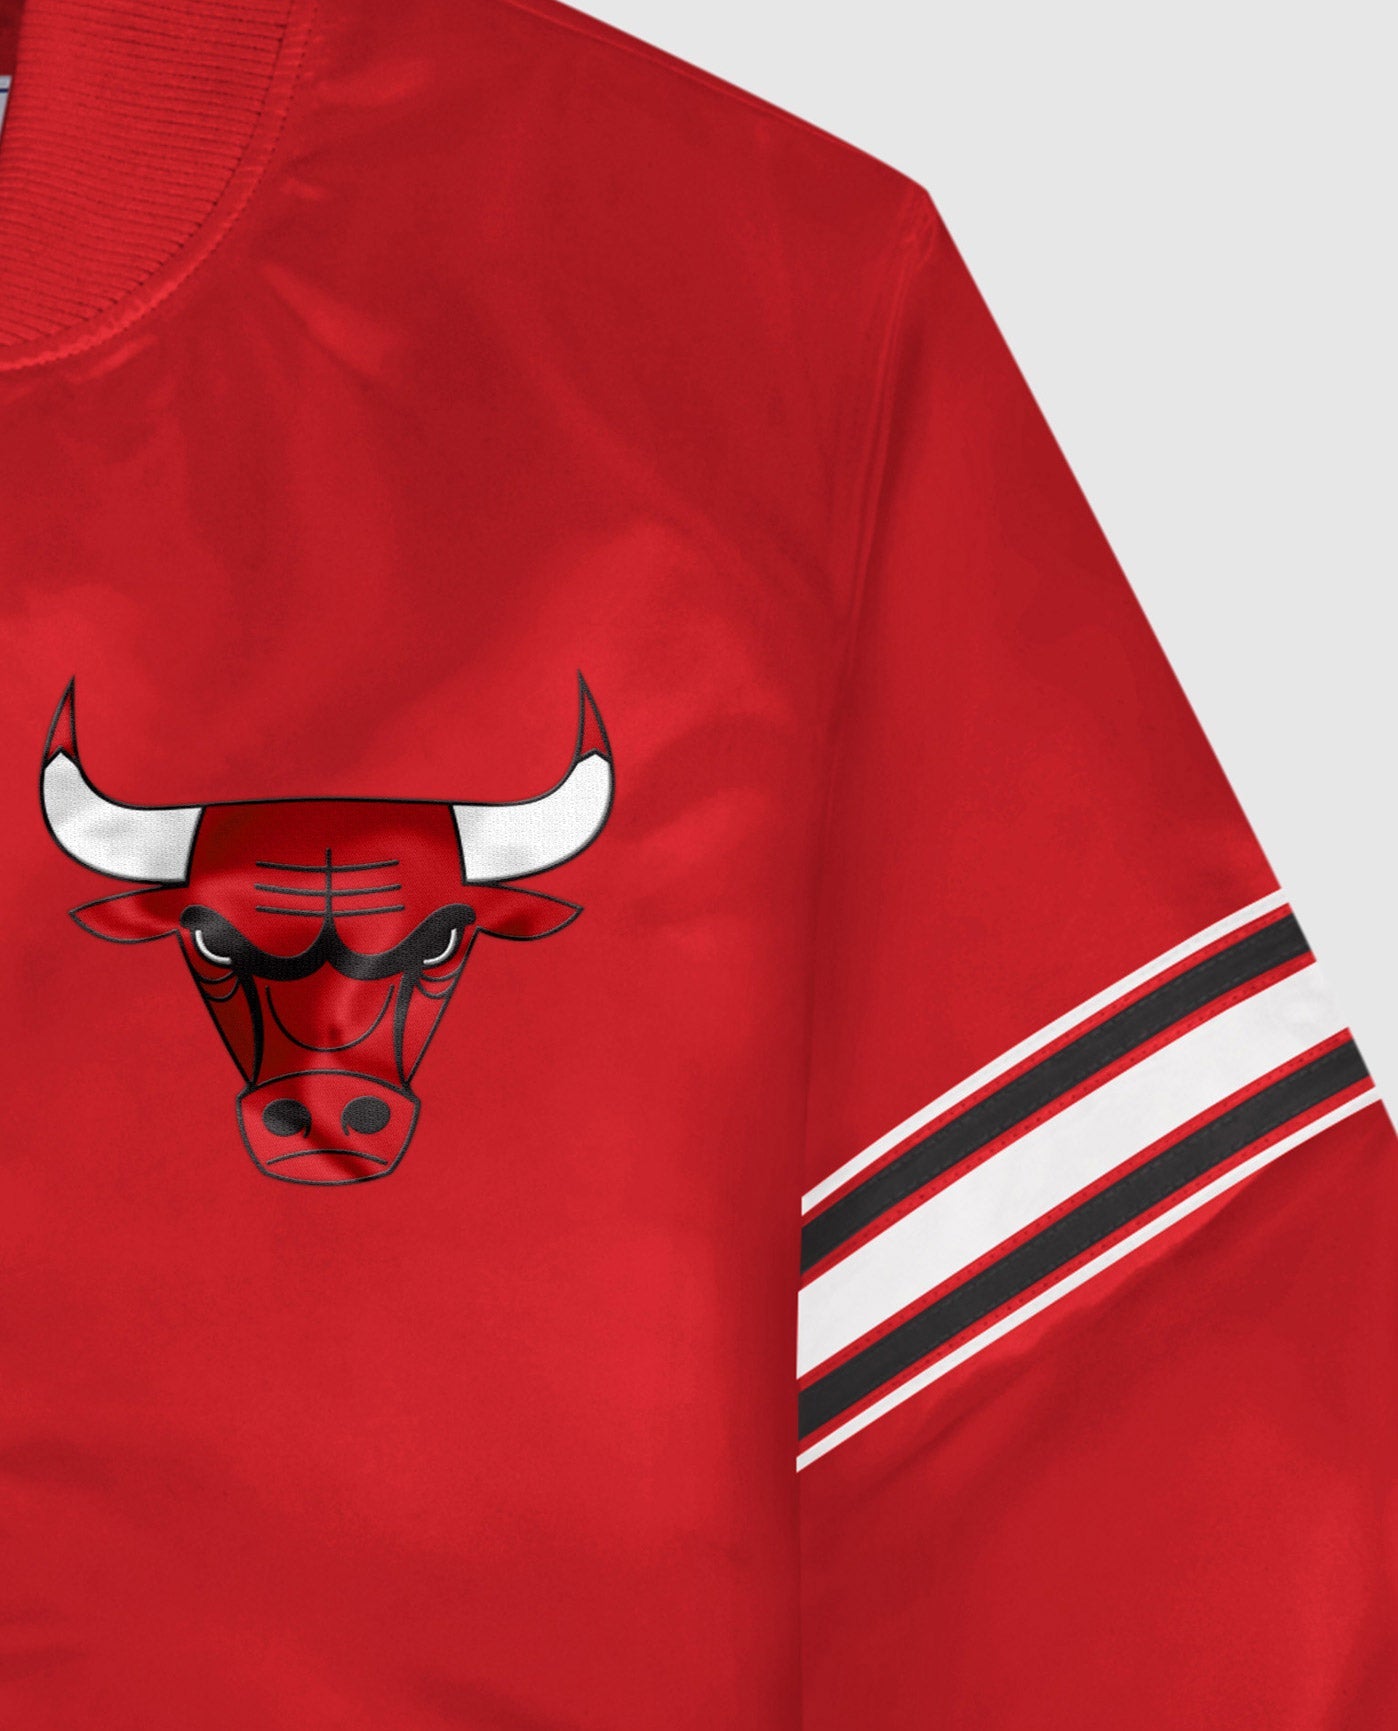 Chicago Bulls Twill Applique Logo And Color Stripe Sleeve | Bulls Red